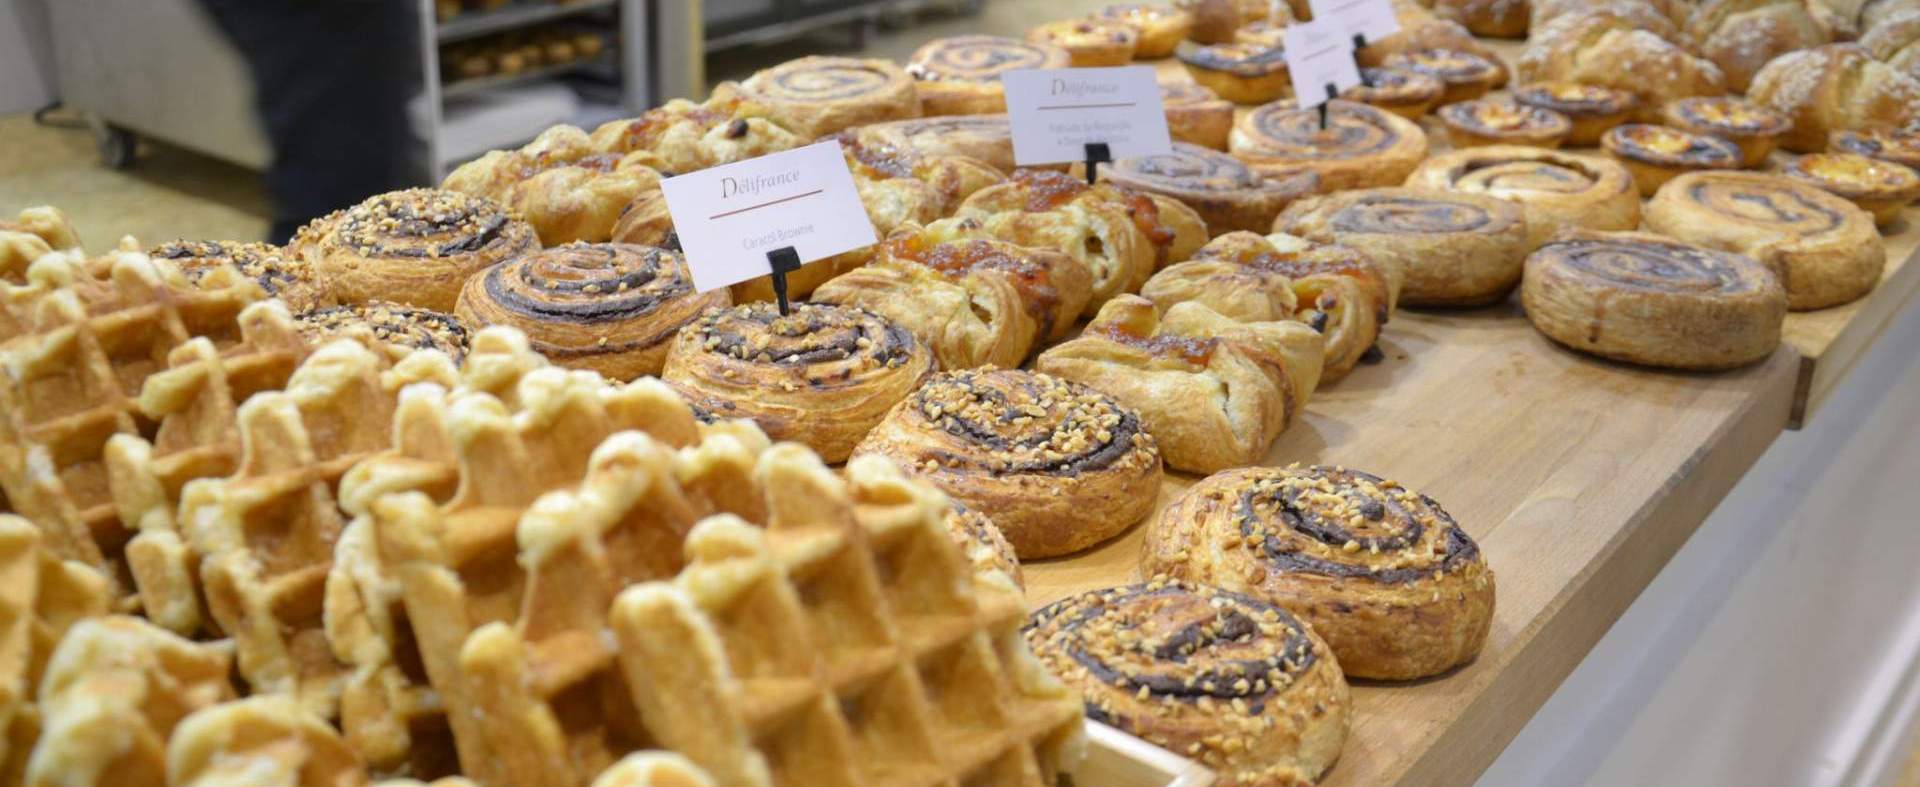 Reference fair of the bakery and pastry industry comes to an end with full satisfaction of the exhibitors